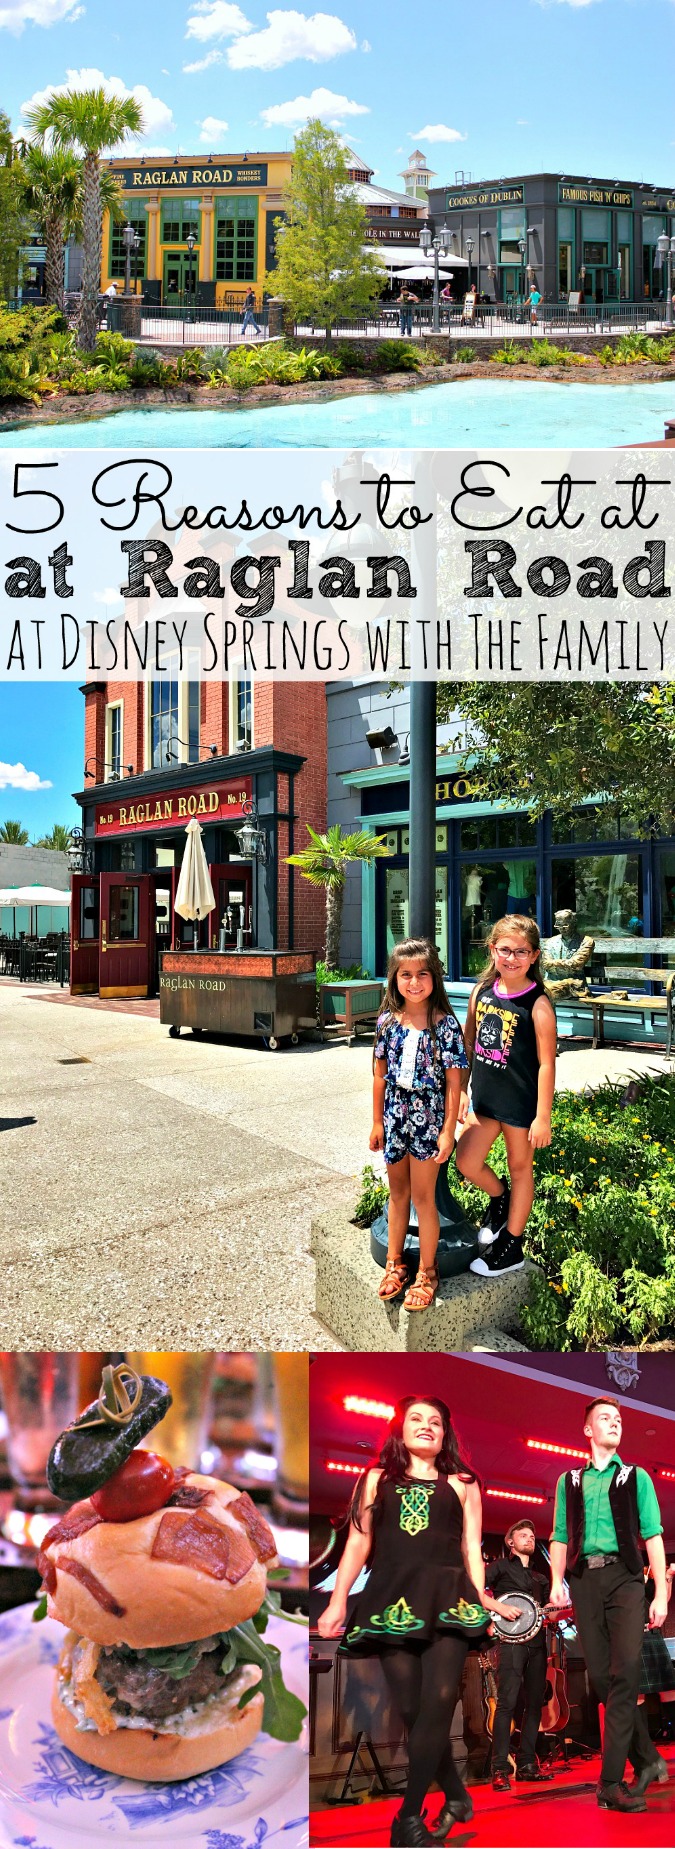 5 Reasons To Eat At Raglan Road At Disney Springs With The Family - simplytodaylife.com